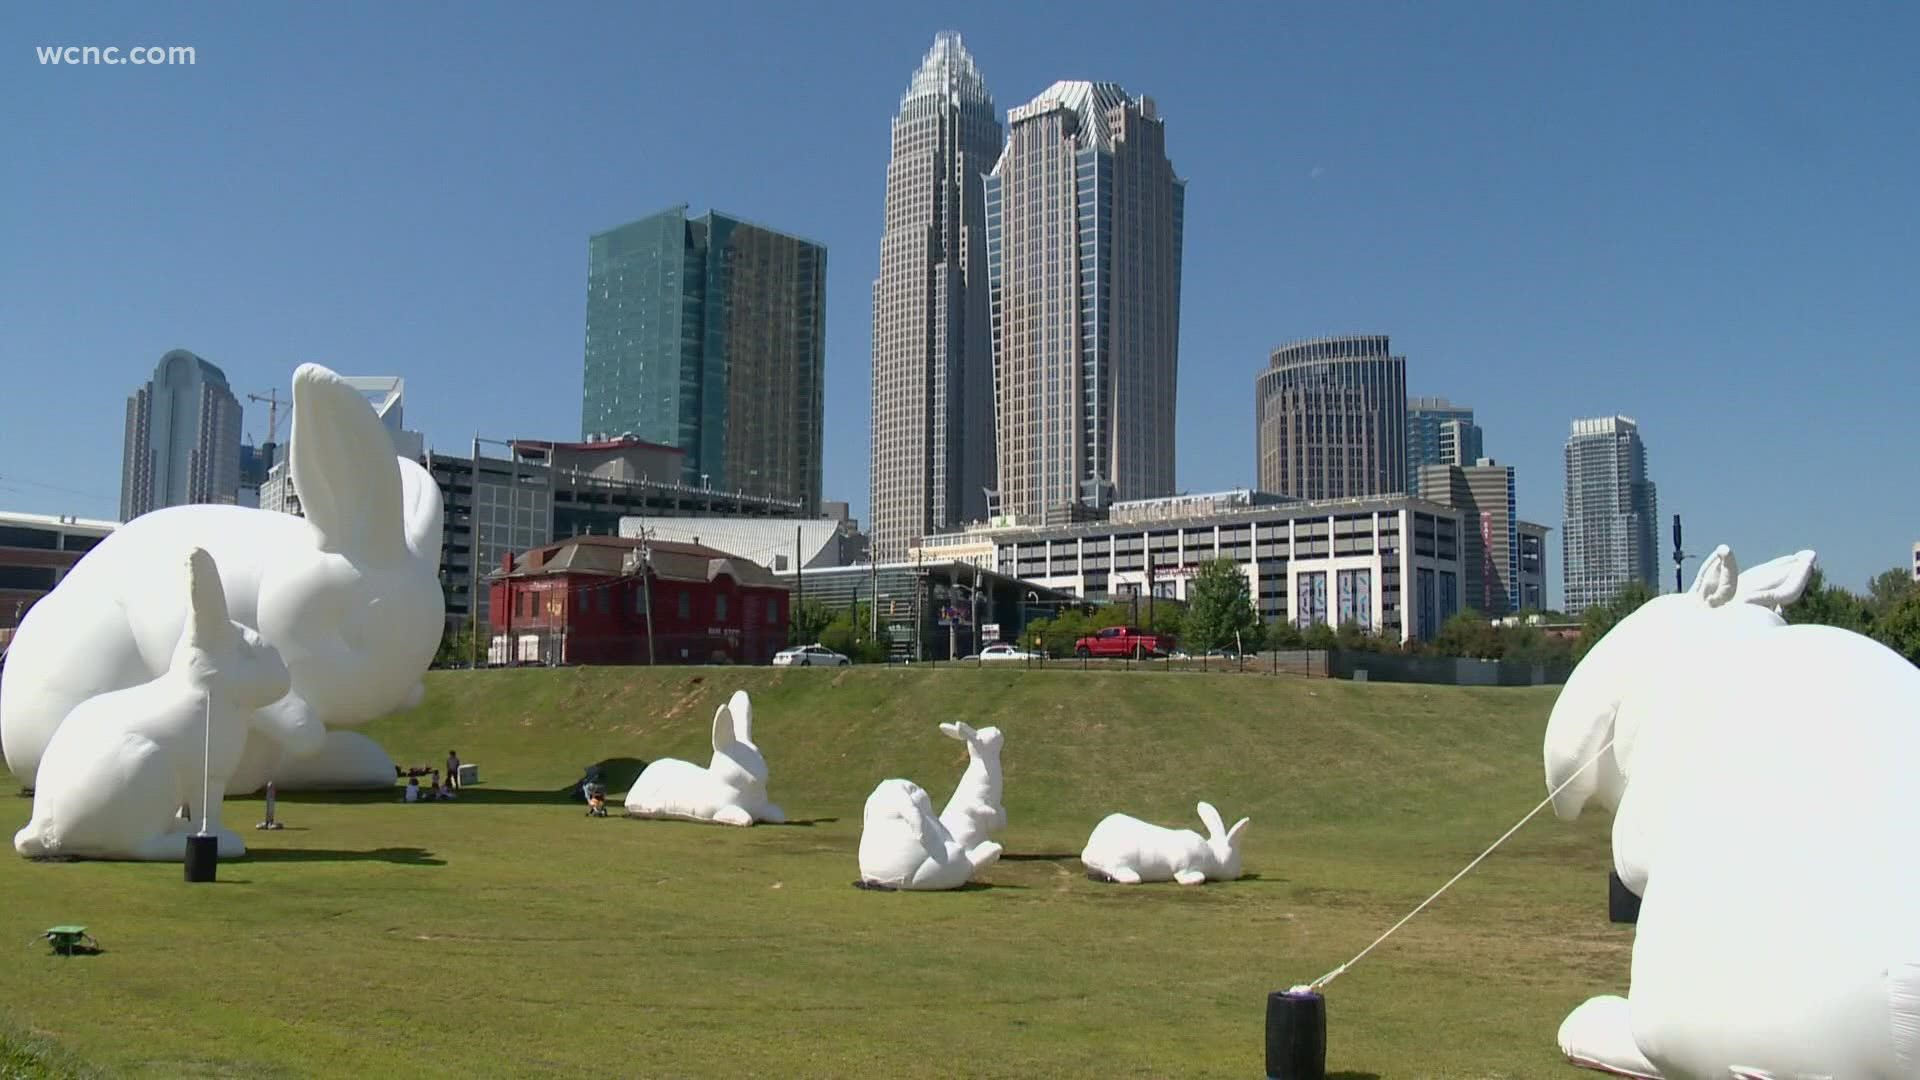 Where to find the INTRUDE bunnies in Charlotte